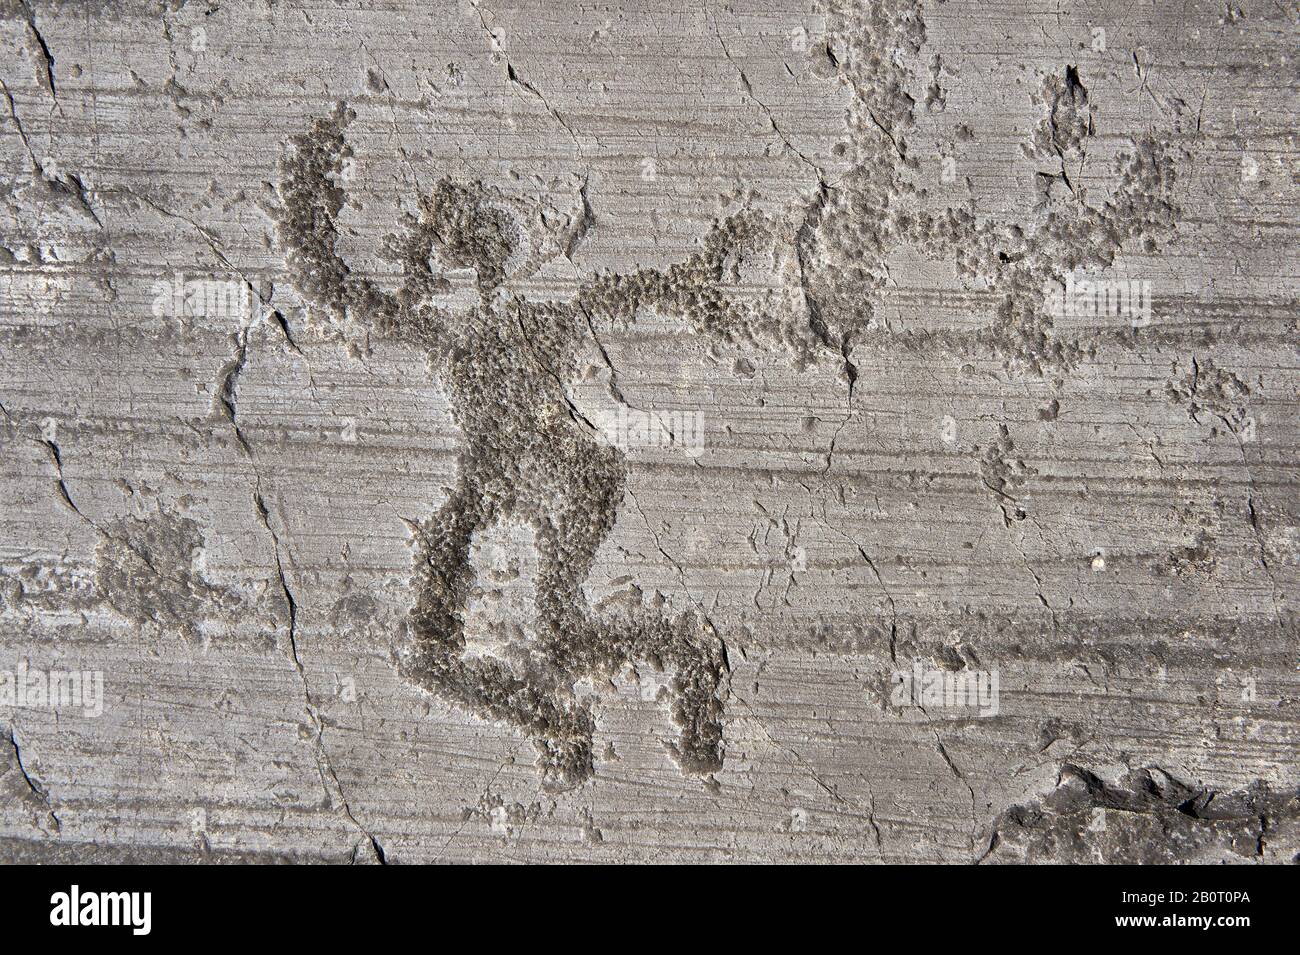 Petroglyph, rock carving, of a dancing warrior holding swords and shields. Carved by the ancient Camuni people in the iron age between 1000-1600 BC. R Stock Photo